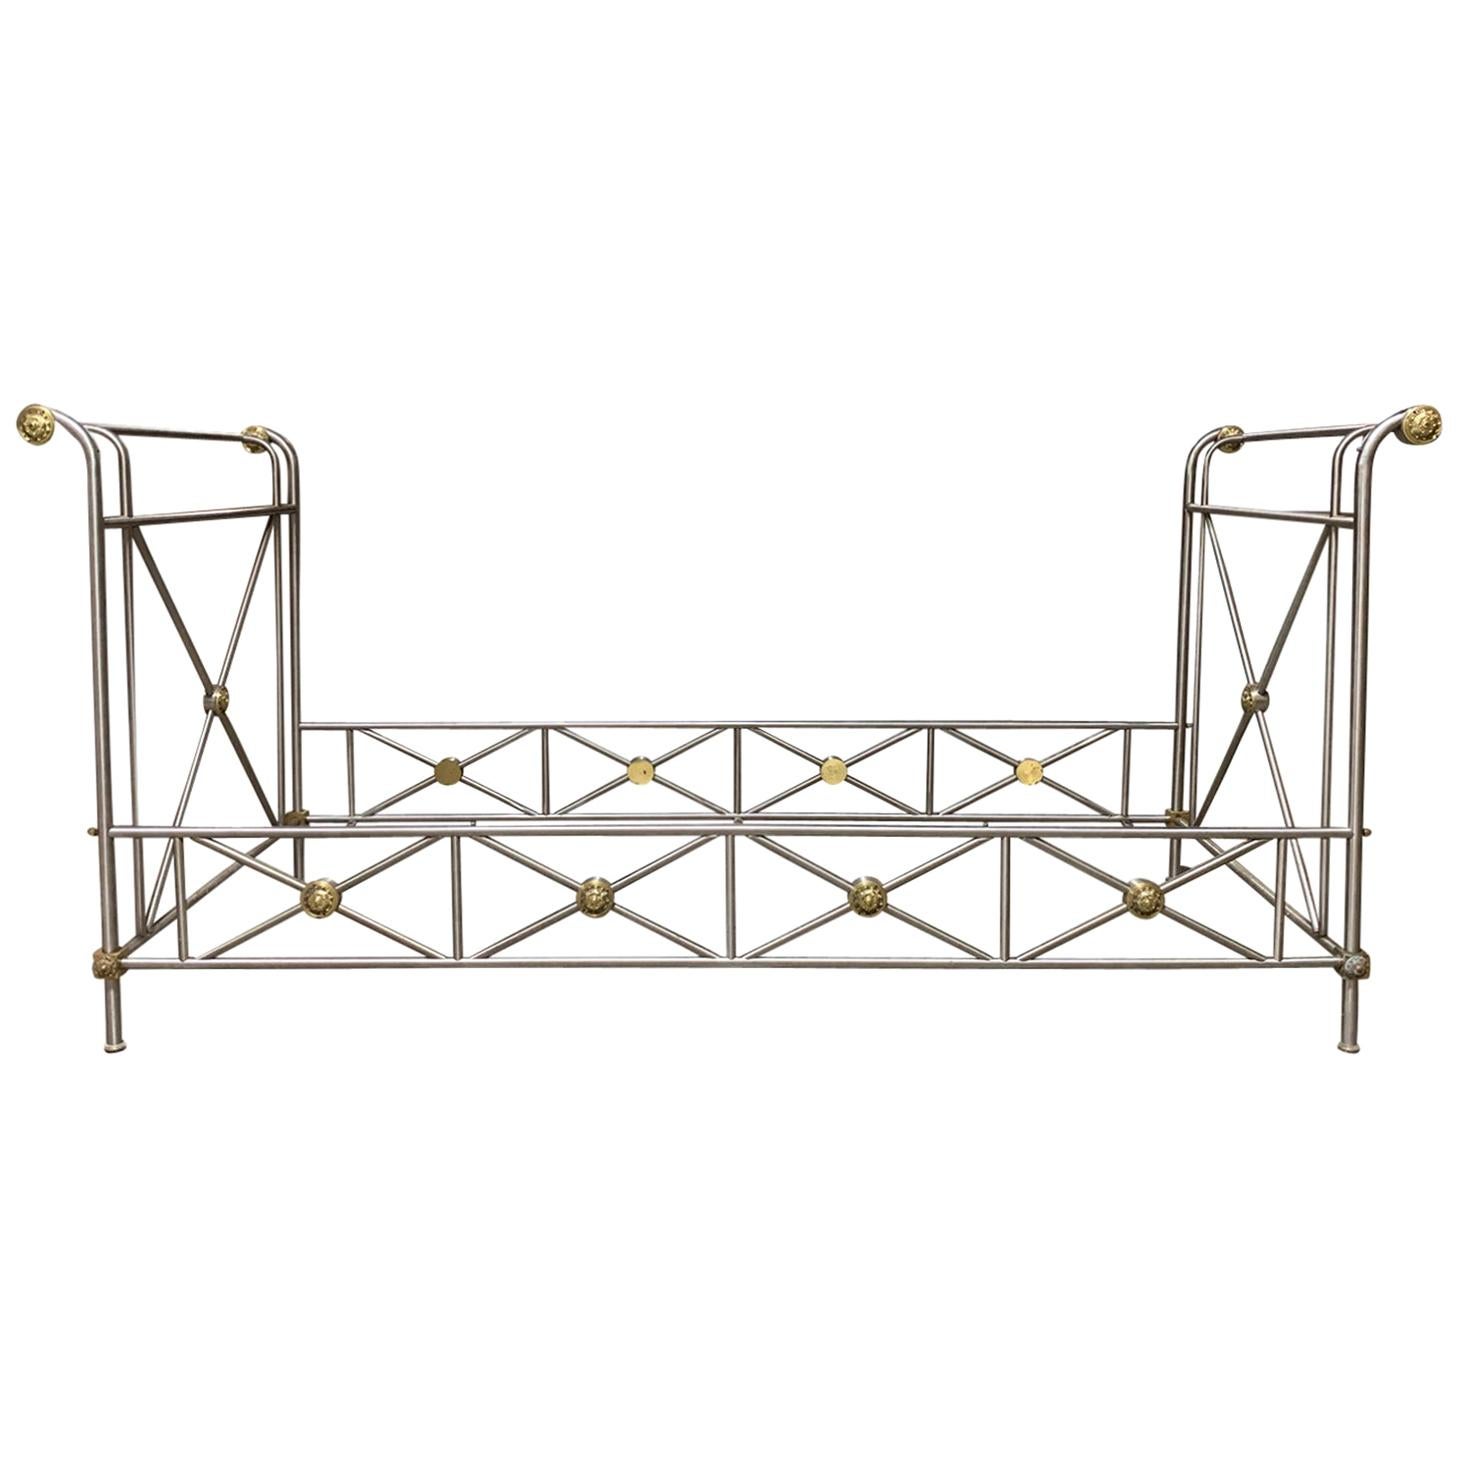 20th Century Maison Jansen Neoclassical Style Brass and Steel Daybed Frame For Sale